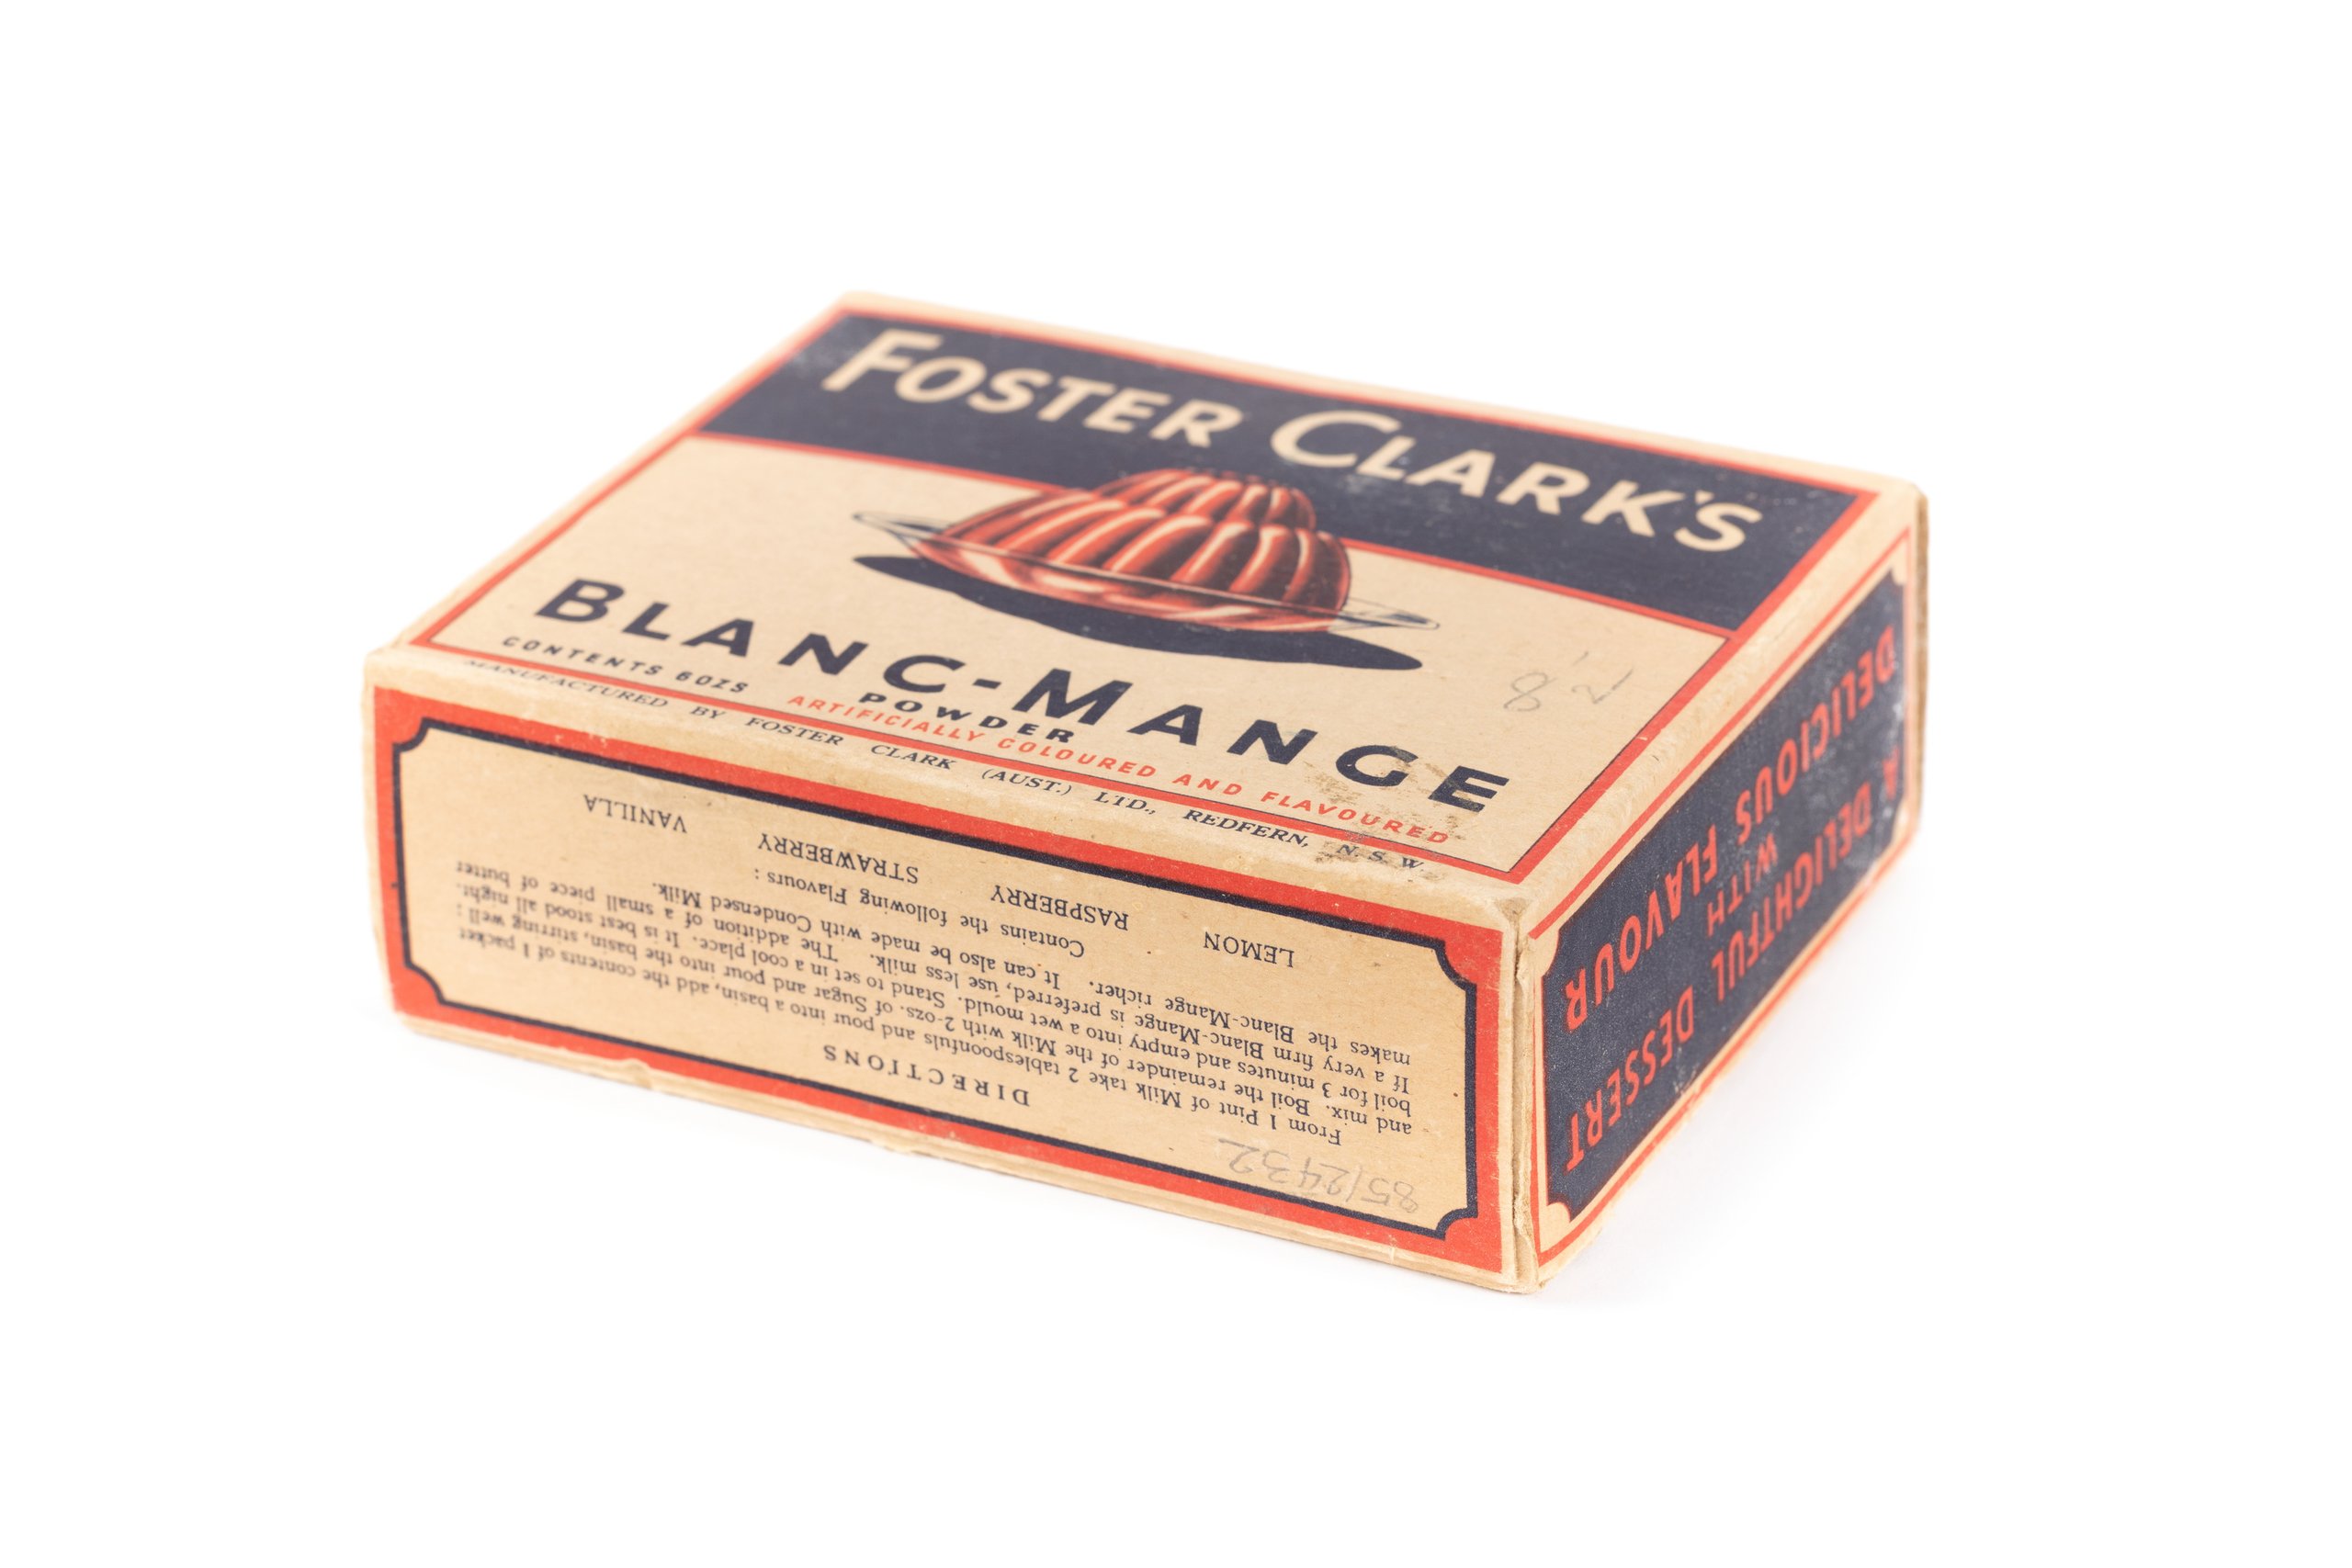 Pudding mix 'Blanc-Mange' packet by Foster Clark Ltd